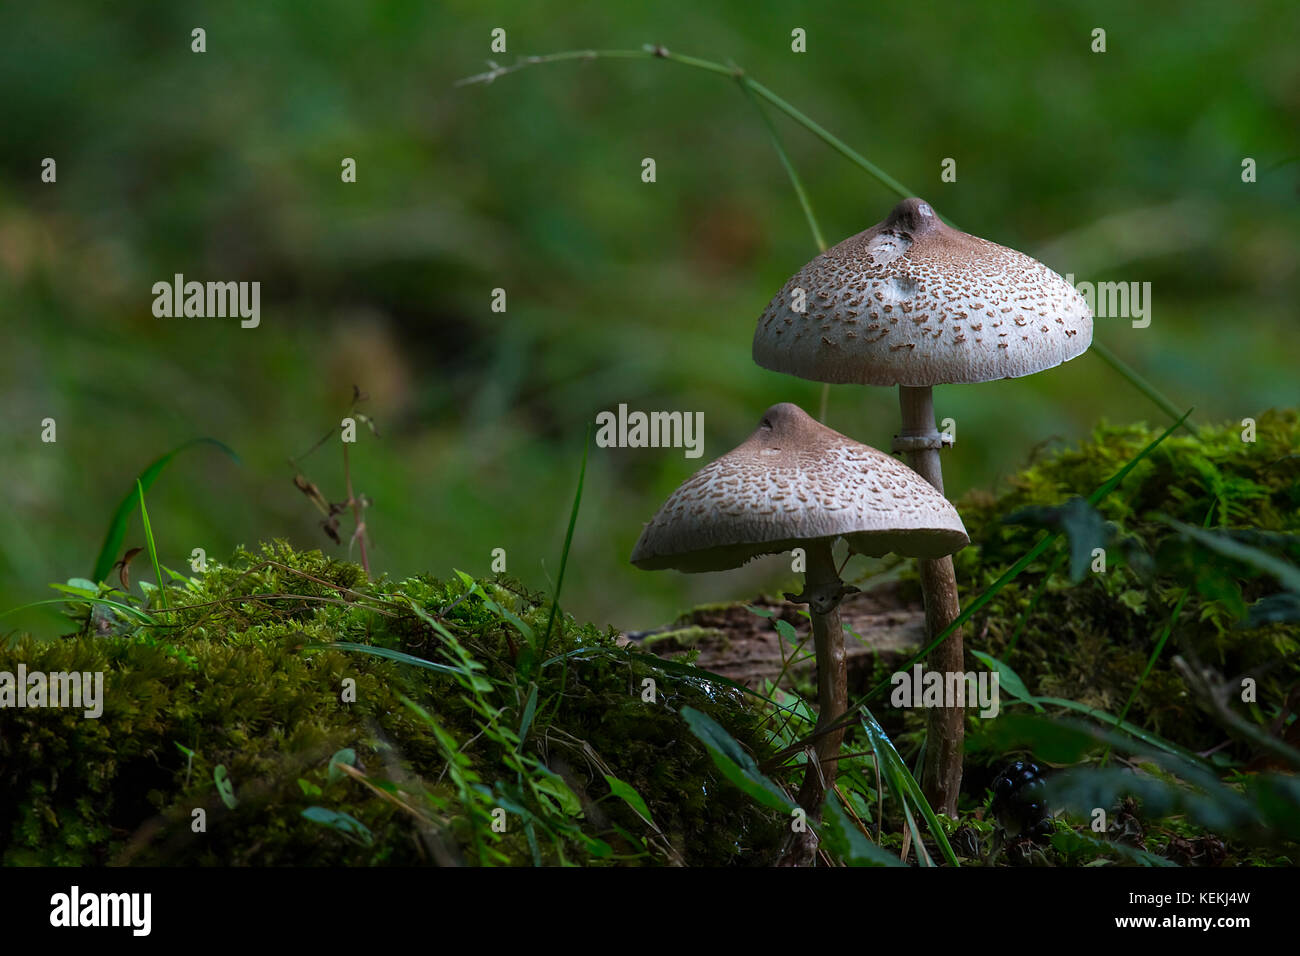 Walking through a forest I saw these Mushrooms growing out of the Moss, a ready made composition. Stock Photo